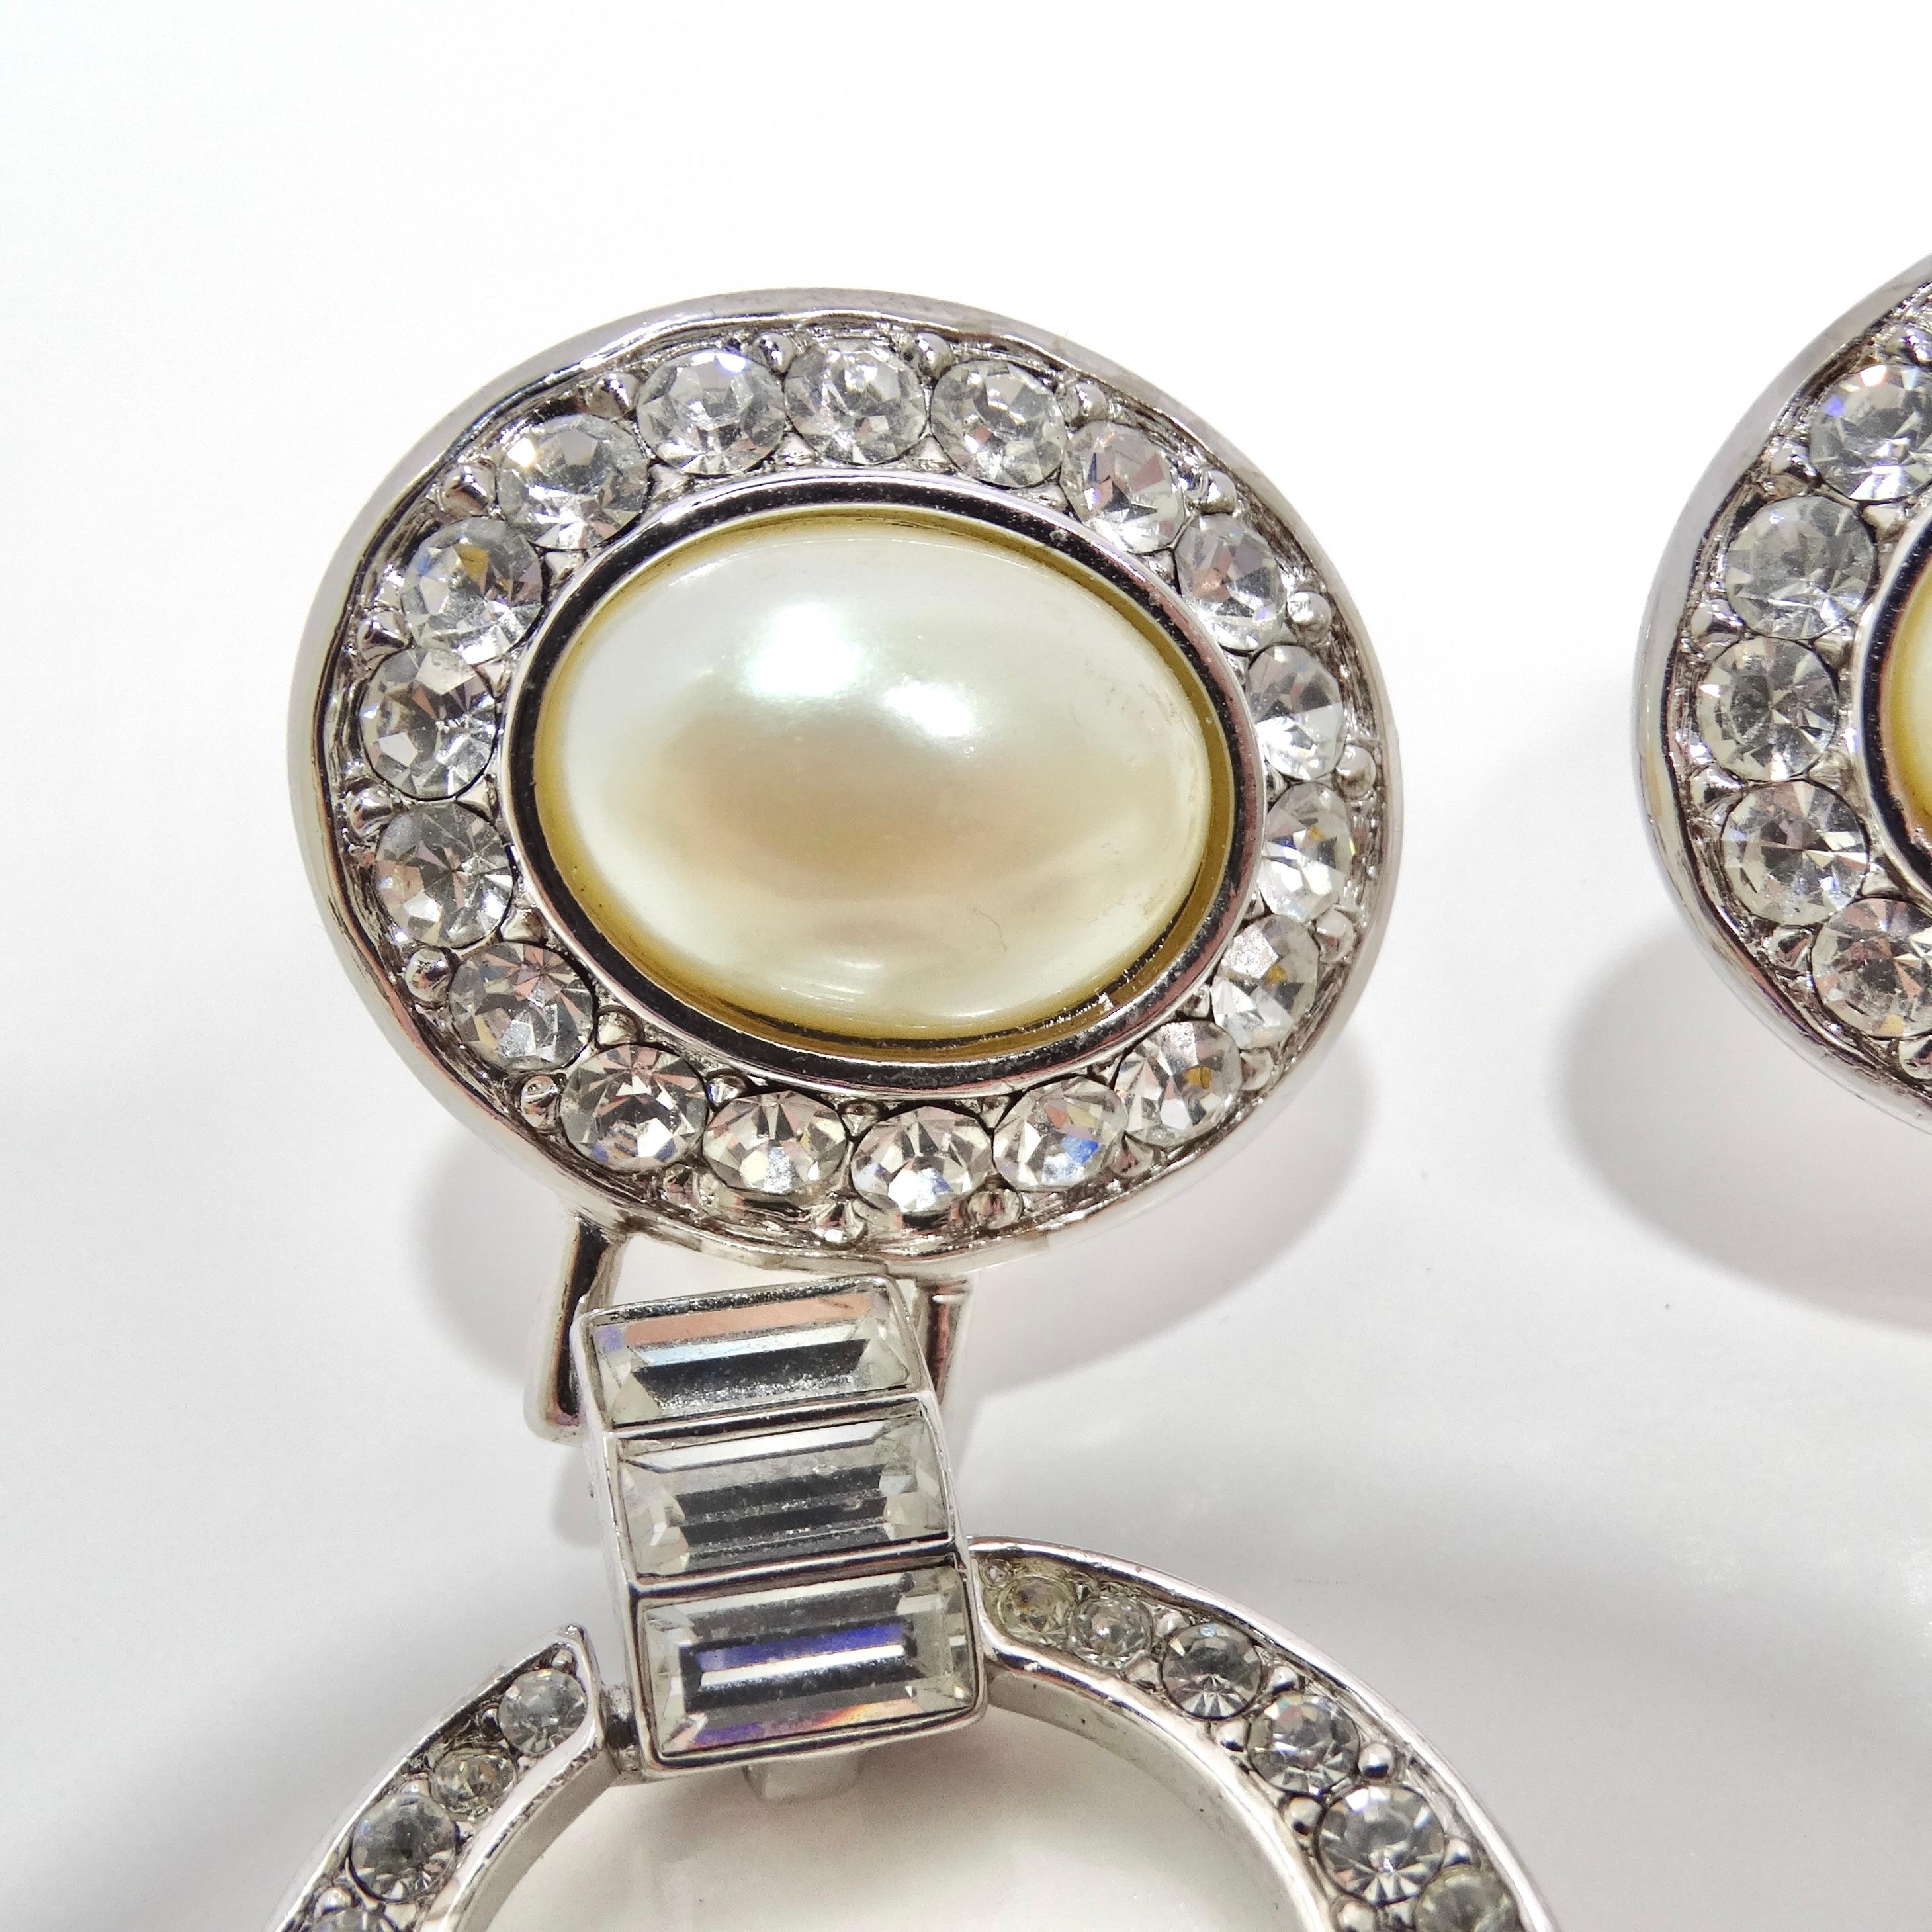 Yves Saint Laurent 1990s Faux Sapphire Pearl Dangle Earrings In Excellent Condition For Sale In Scottsdale, AZ